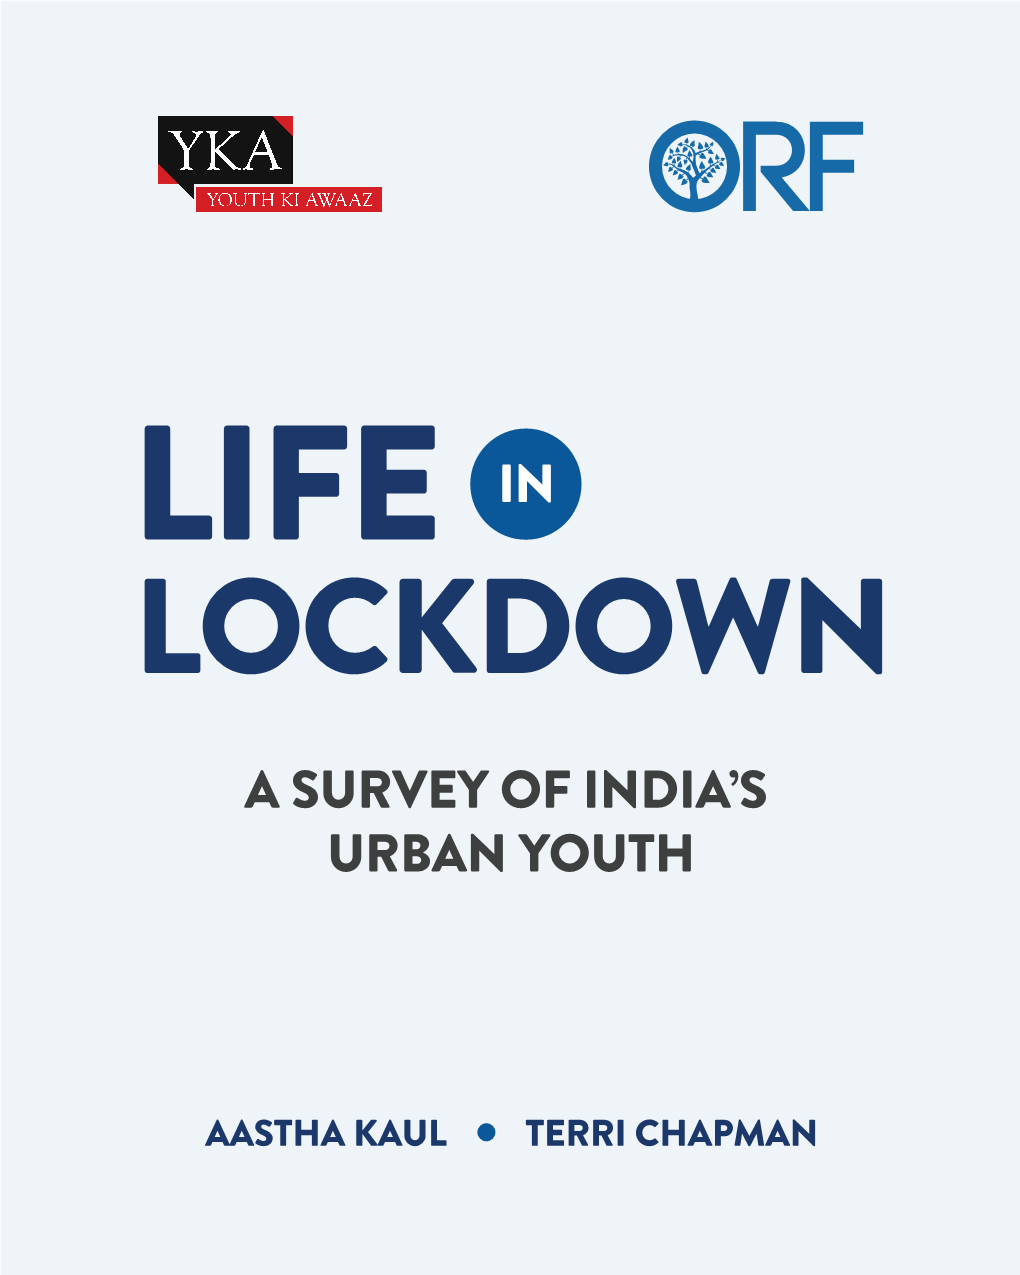 Life in Lockdown: a Survey of India's Urban Youth